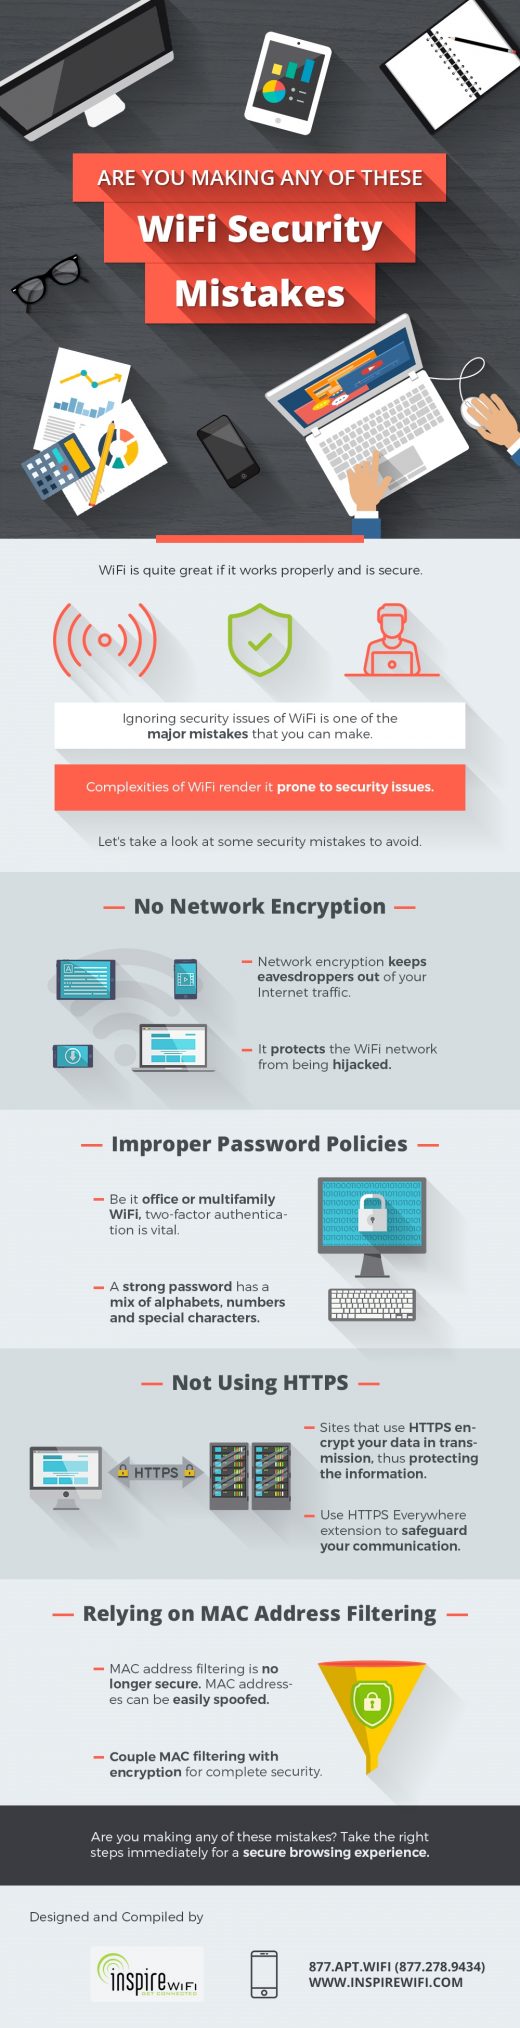 Is Your Business Making Any Of These WiFi Security Mistakes? [Infographic]